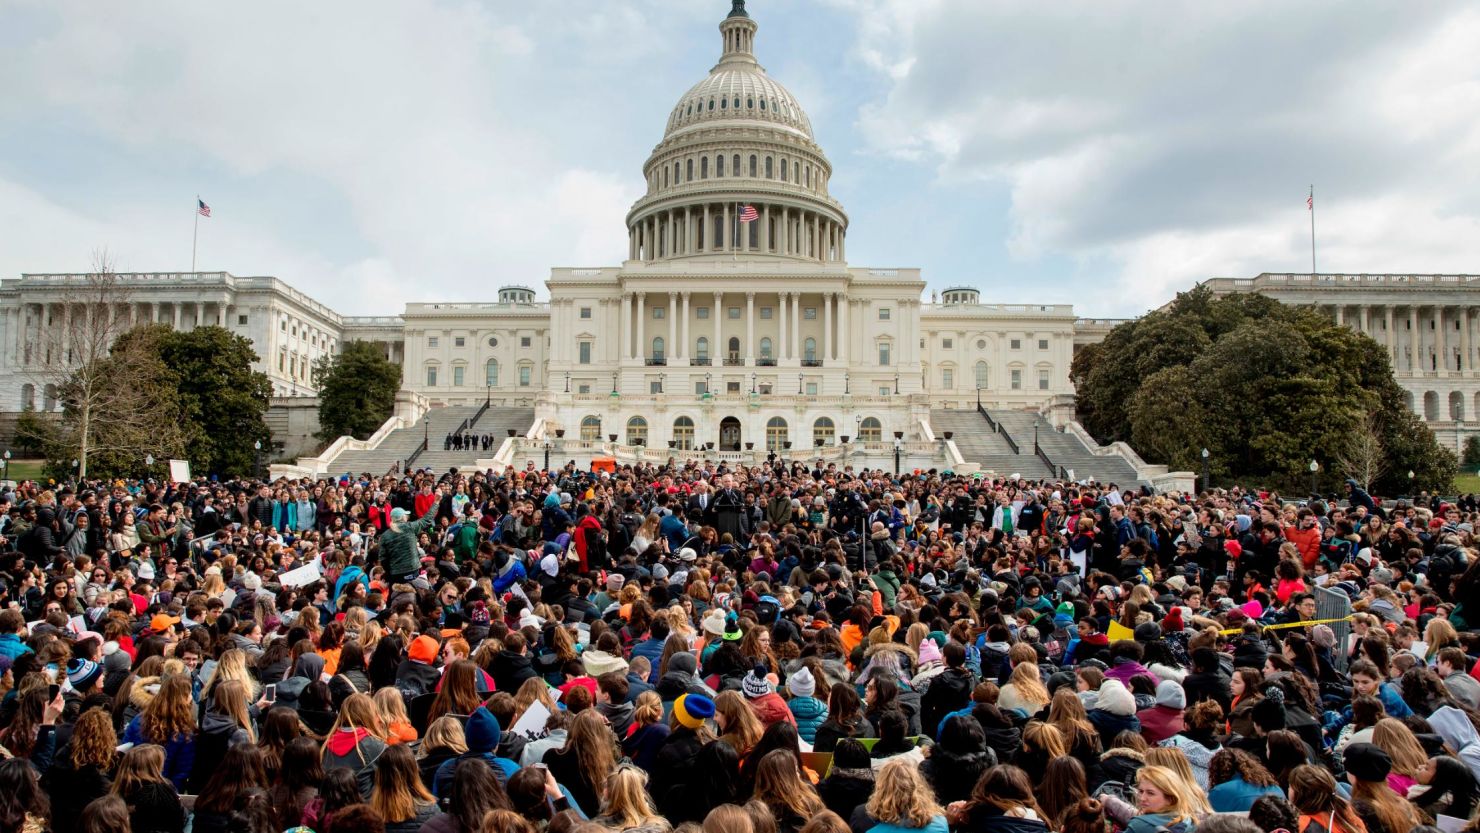 Students rally outside the Capitol Building in Washington, Wednesday, March 14, 2018, a precursor to the March for Our Lives rallies this weekend.